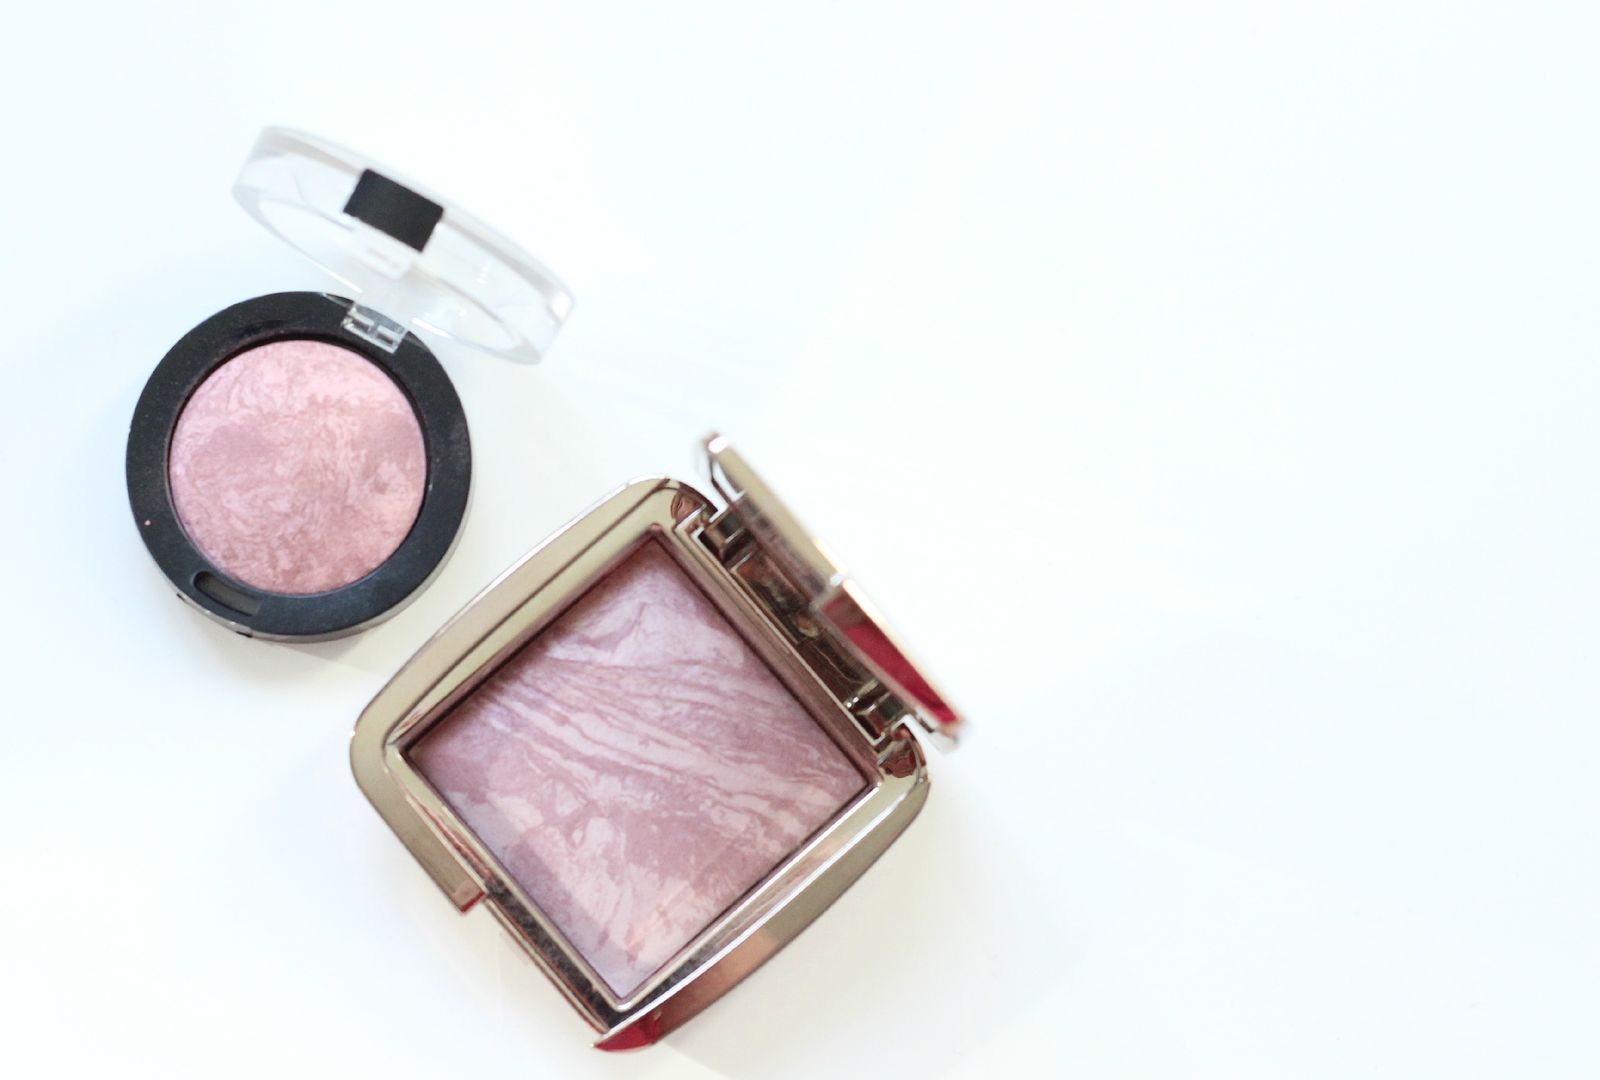 A drugstore dupe for the Hourglass ambient lighting blushes